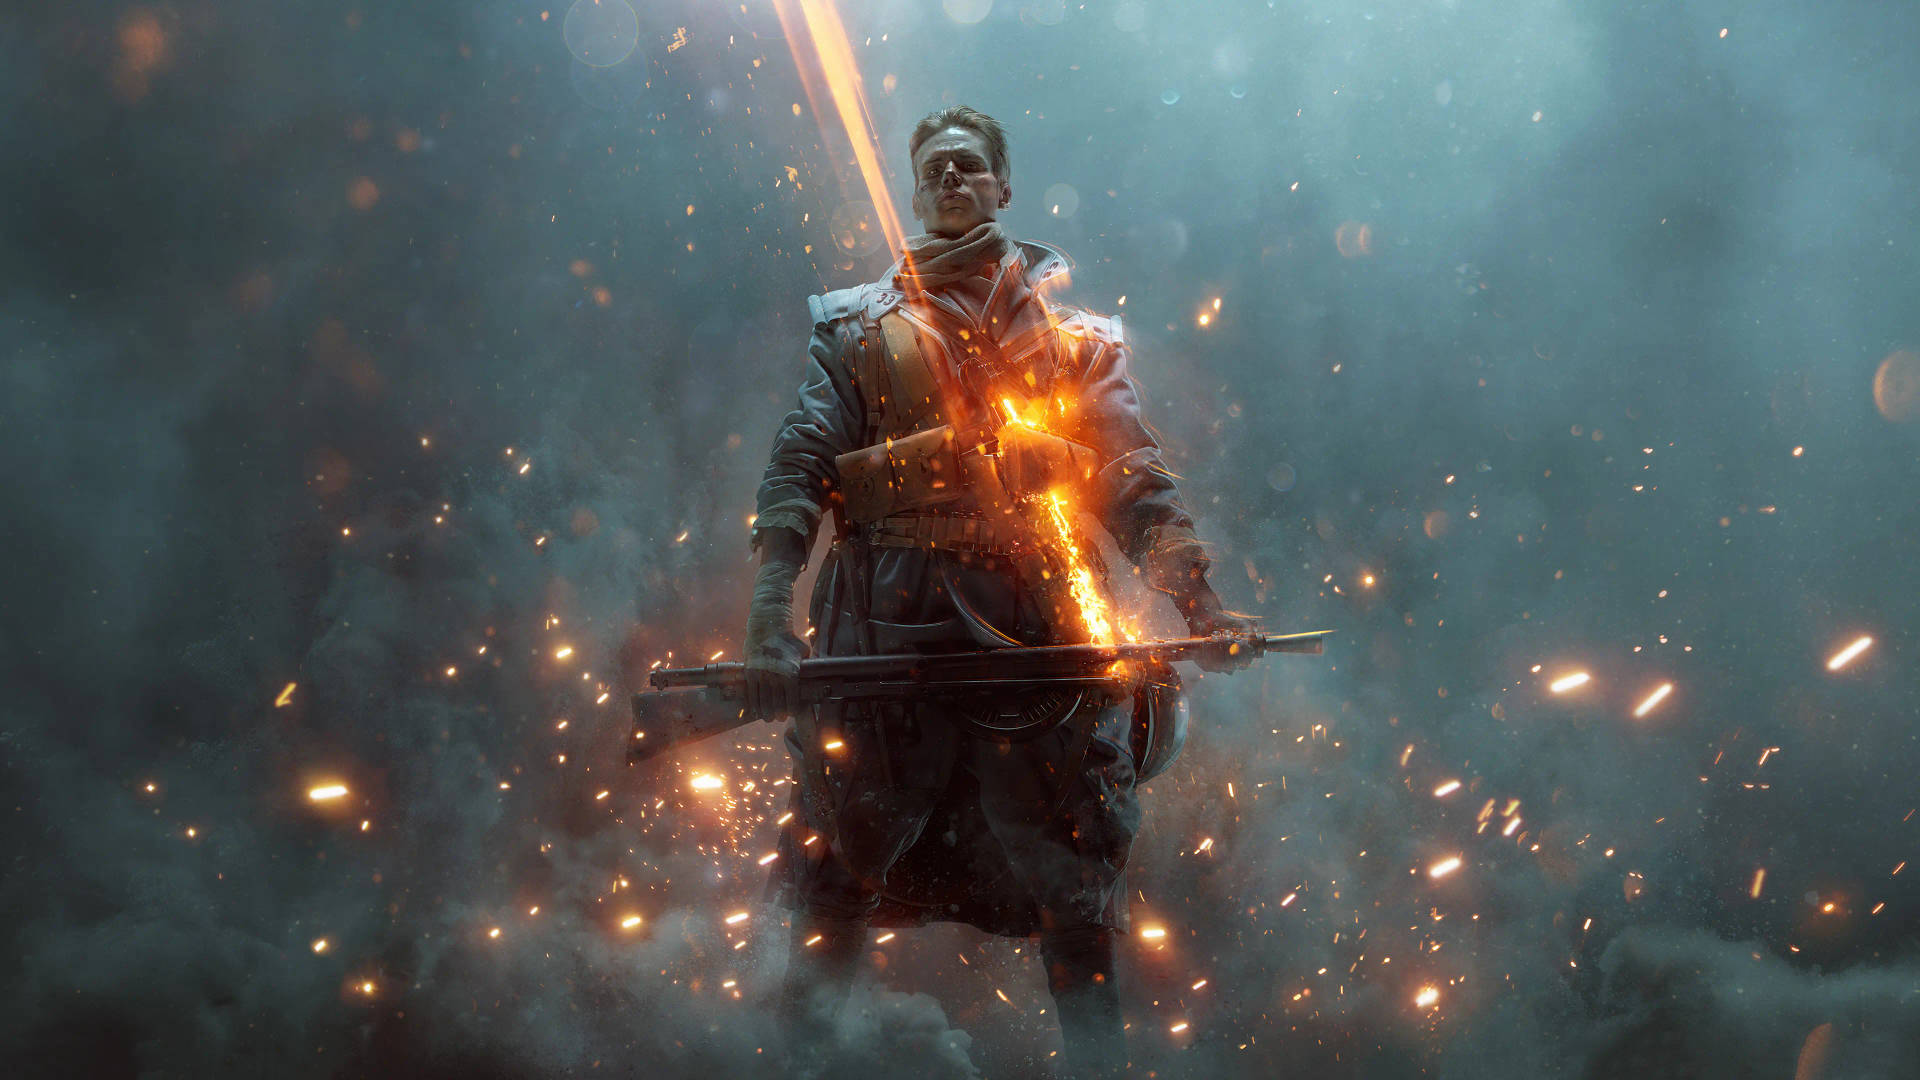 Caption: Stunning 4K Representation of a French soldier wielding a Chauchat in Battlefield 1 Wallpaper